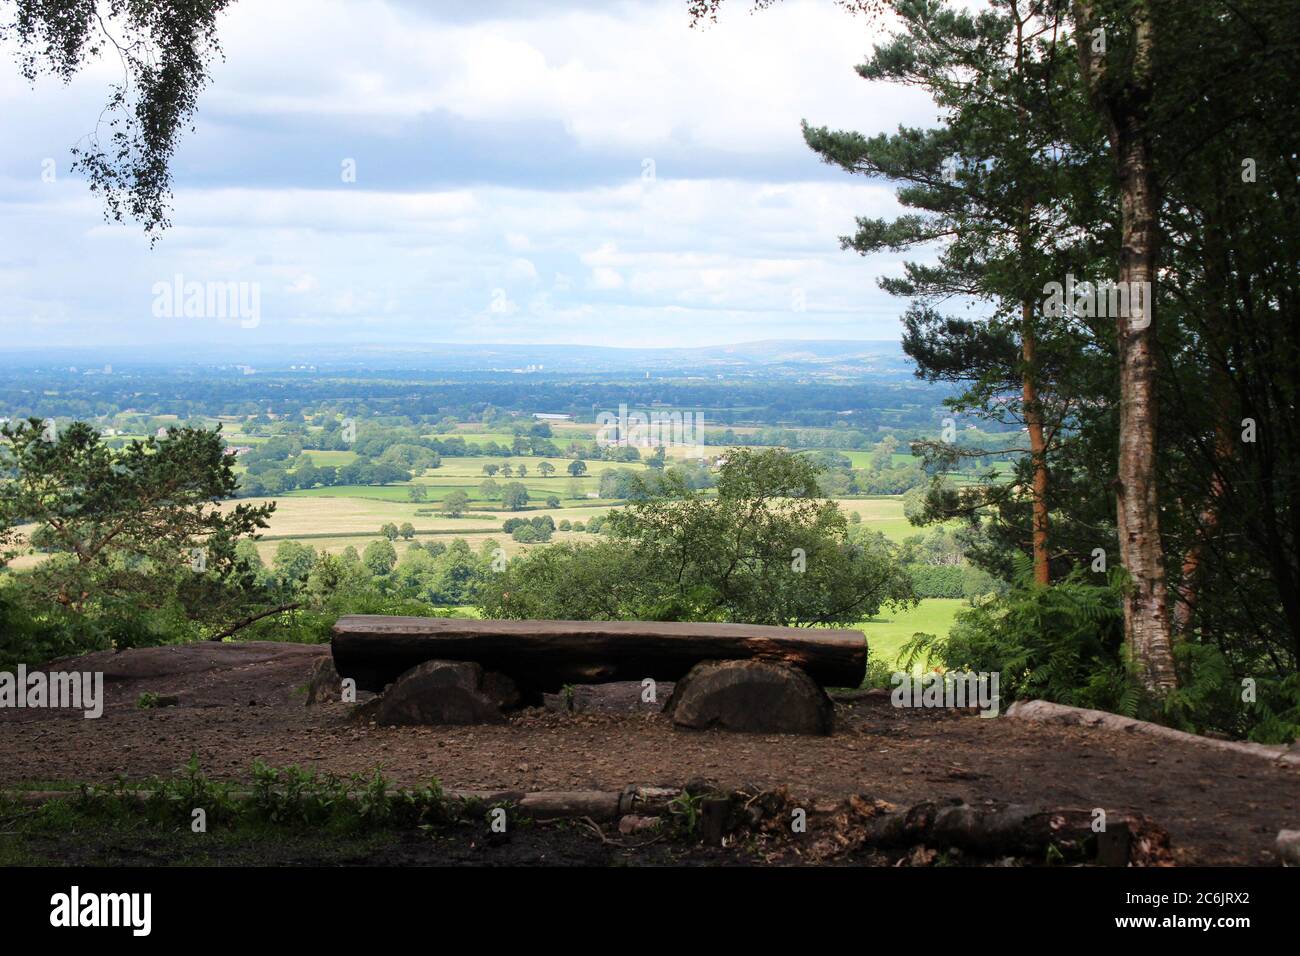 View of Cheshire from the stormy point area, inc a wooden bench and trees, at Alderley edge in Cheshire, England Stock Photo